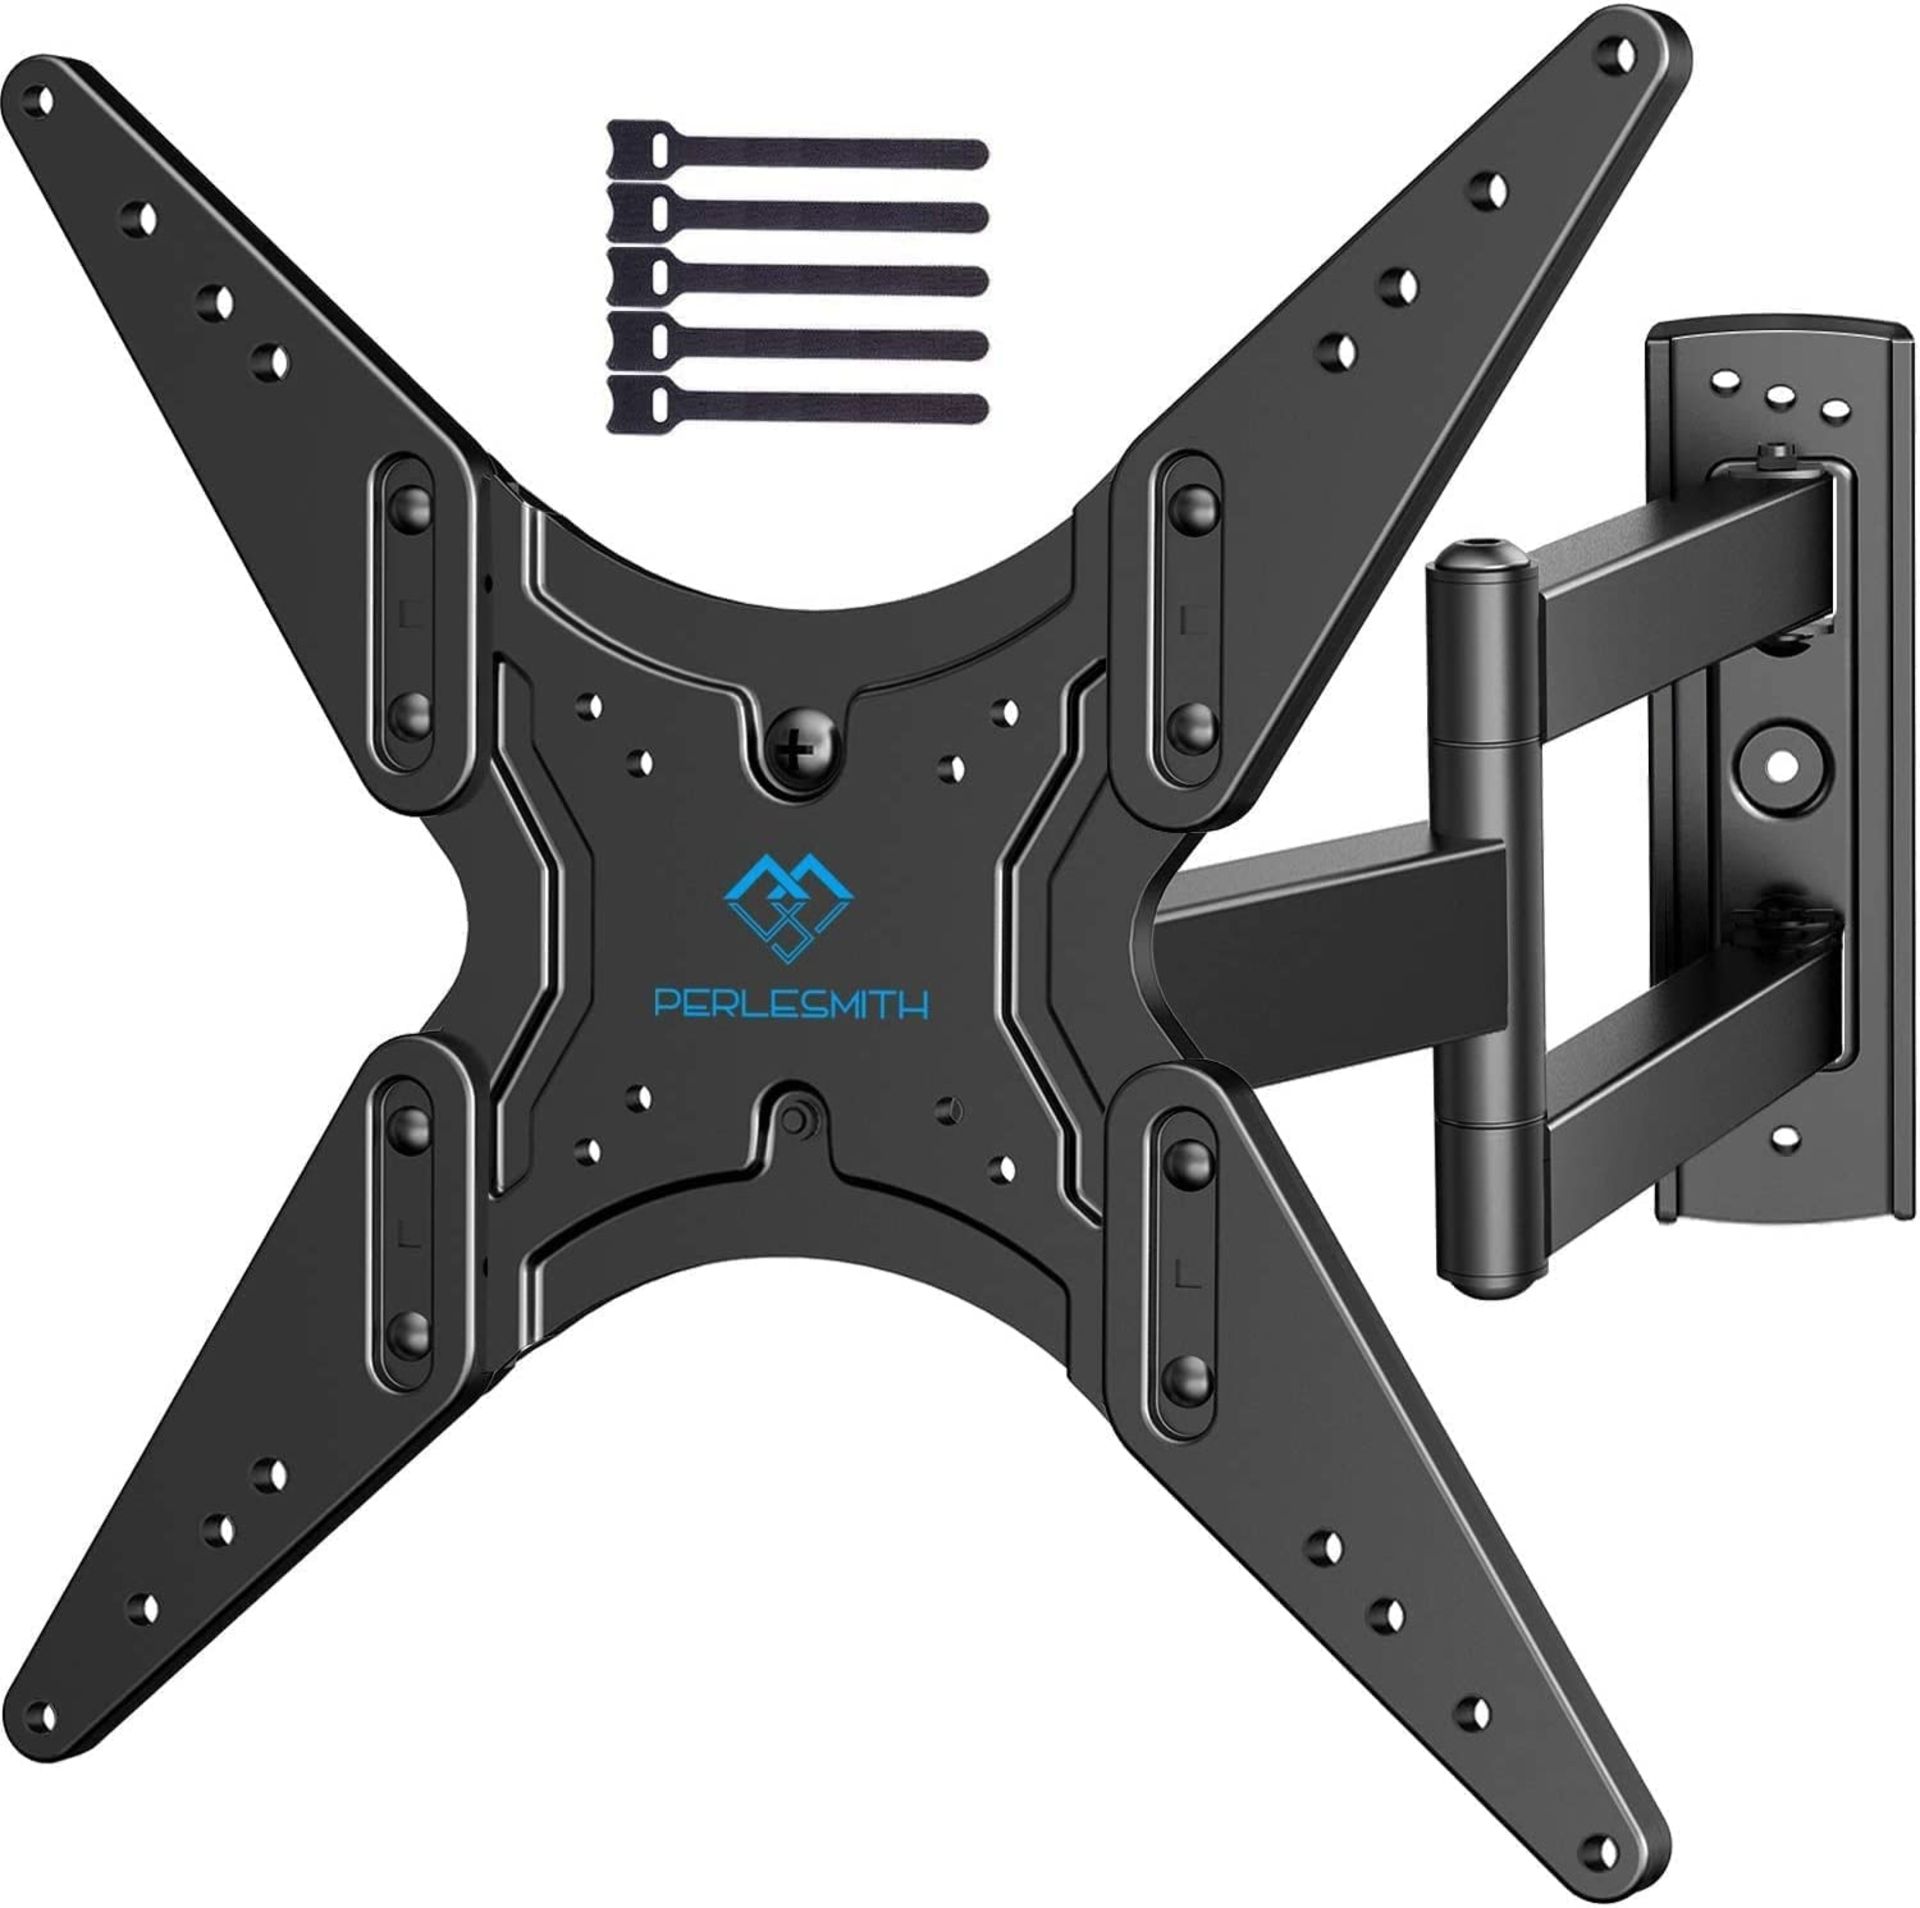 KING KL44 MULTI POSITION TV WALL MOUNT 26-55INCH RRP £24.99